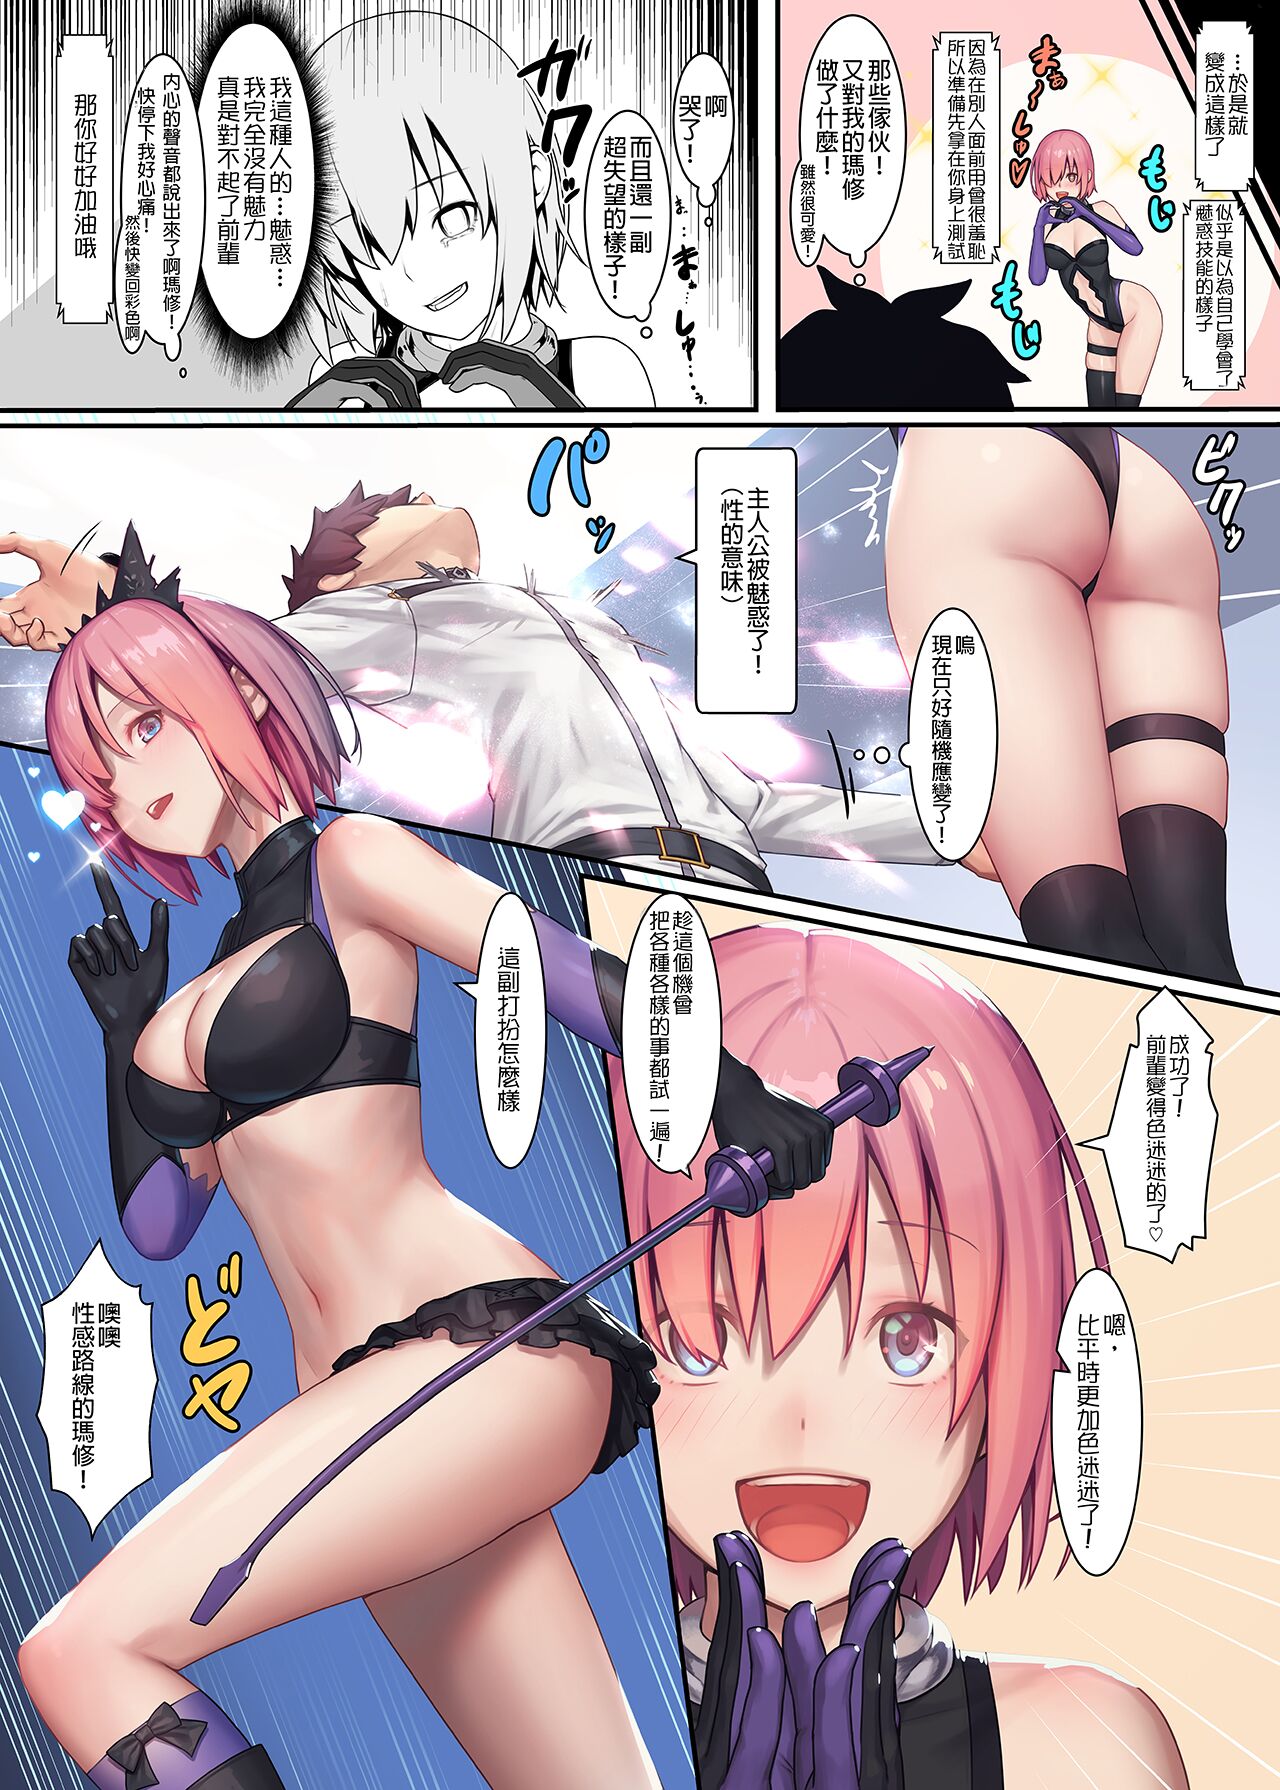 [Kenja Time (MANA)] FATE/GENTLE ORDER 4 "Lily"(Fate/Grand Order) [Chinese] [谜之汉化组X·Alter&无毒気汉化组&reoltora个人重嵌] [Decensored] [Digital] [けんじゃたいむ (MANA)] FATE/GENTLE ORDER 4「リリィ」(Fate/Grand Order) [中国翻訳] [無修正] [DL版]